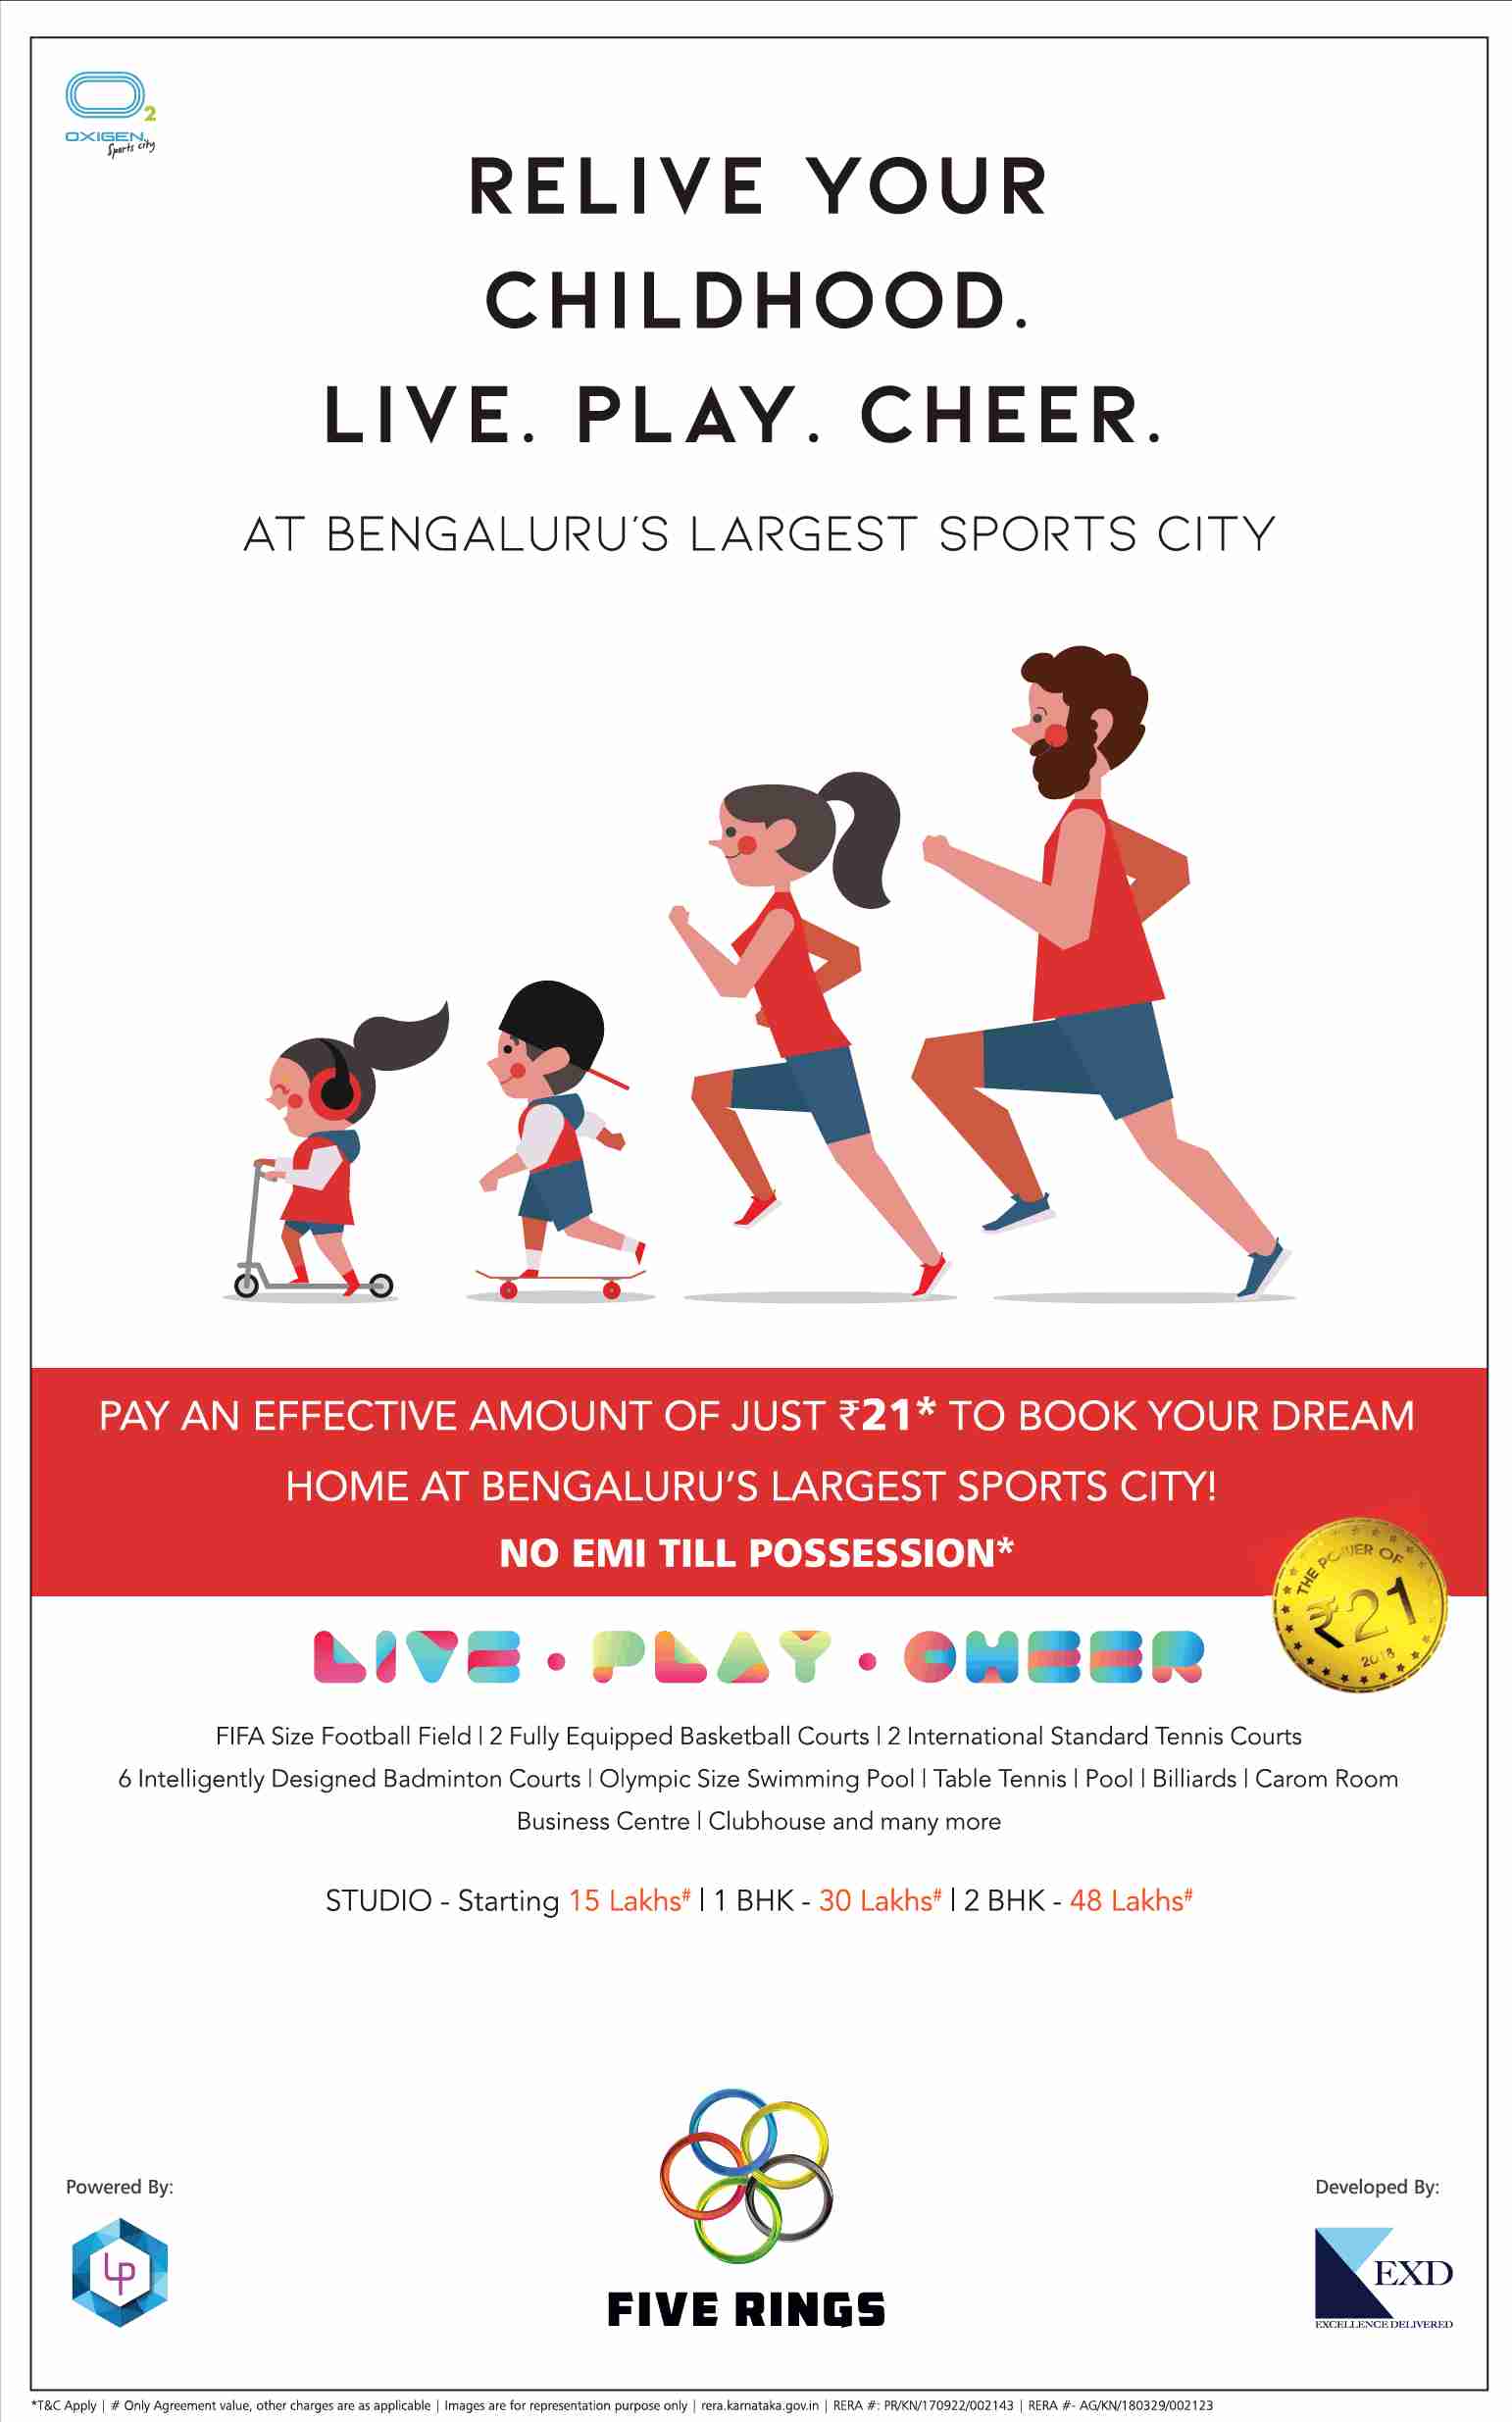 Pay an effective amount of just Rs. 21 to book your dream home at EXD Five Rings in Bangalore Update